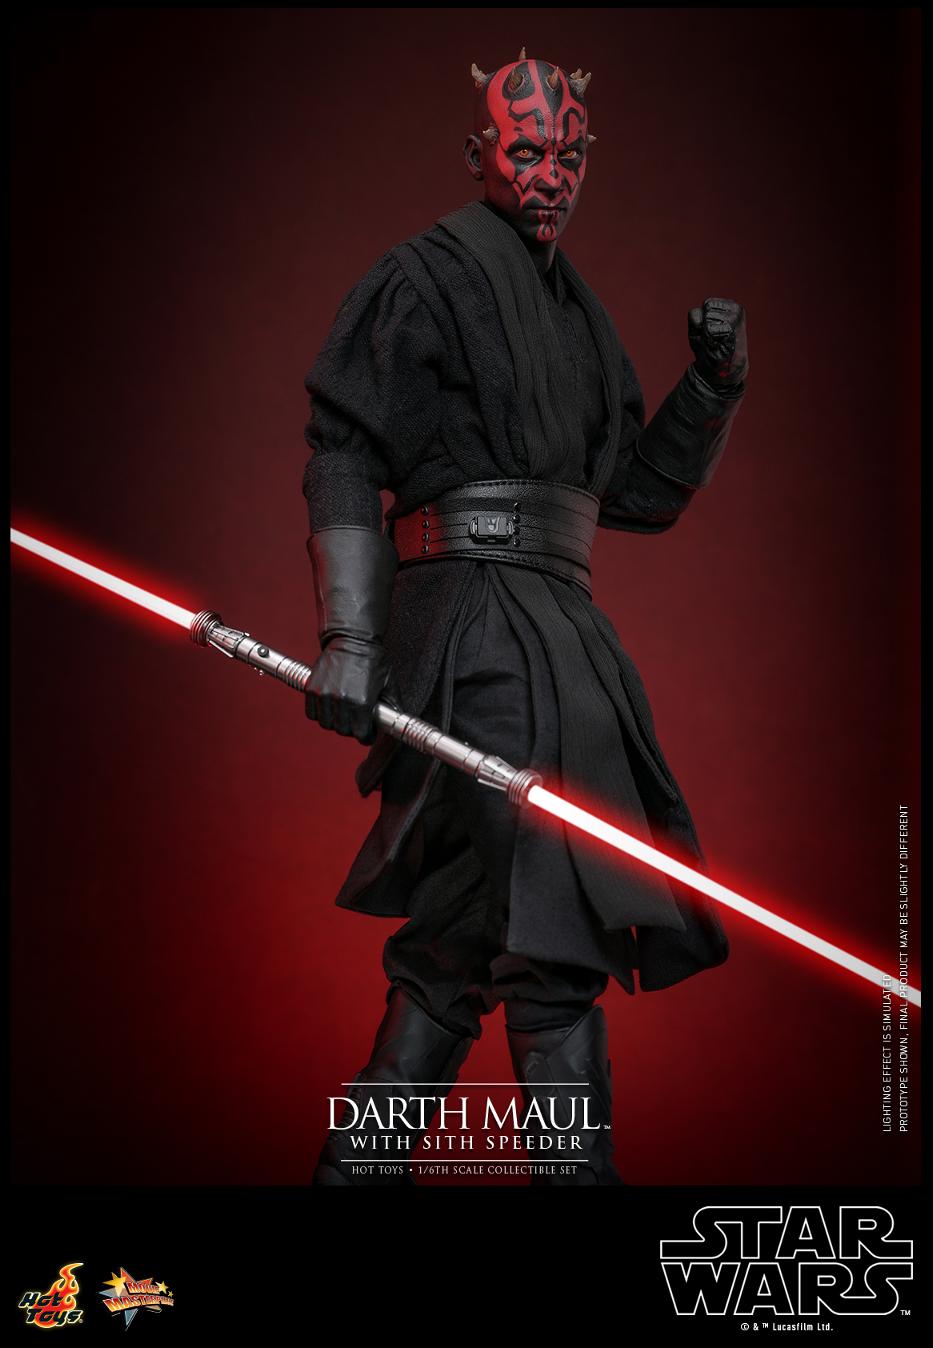 Darth Maul with Sith Speeder Collectible Set - Hot Toys Darth607